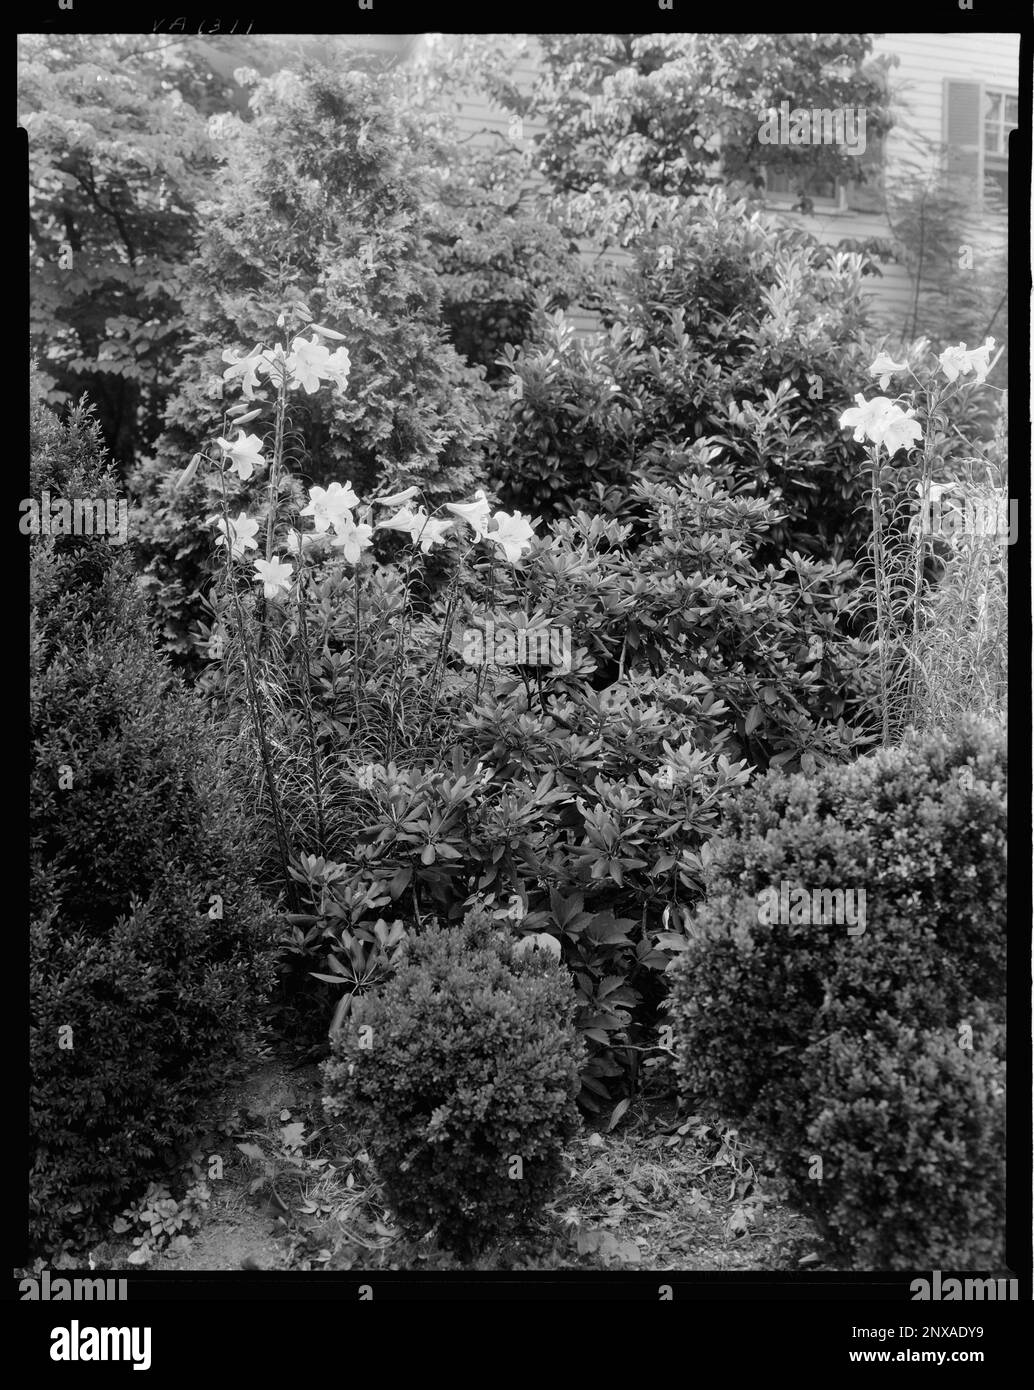 Rose Hill, Greenwood, Albemarle County, Virginia. Carnegie Survey of the Architecture of the South. United States  Virginia  Albemarle County  Greenwood, Lilies, Gardens. Stock Photo